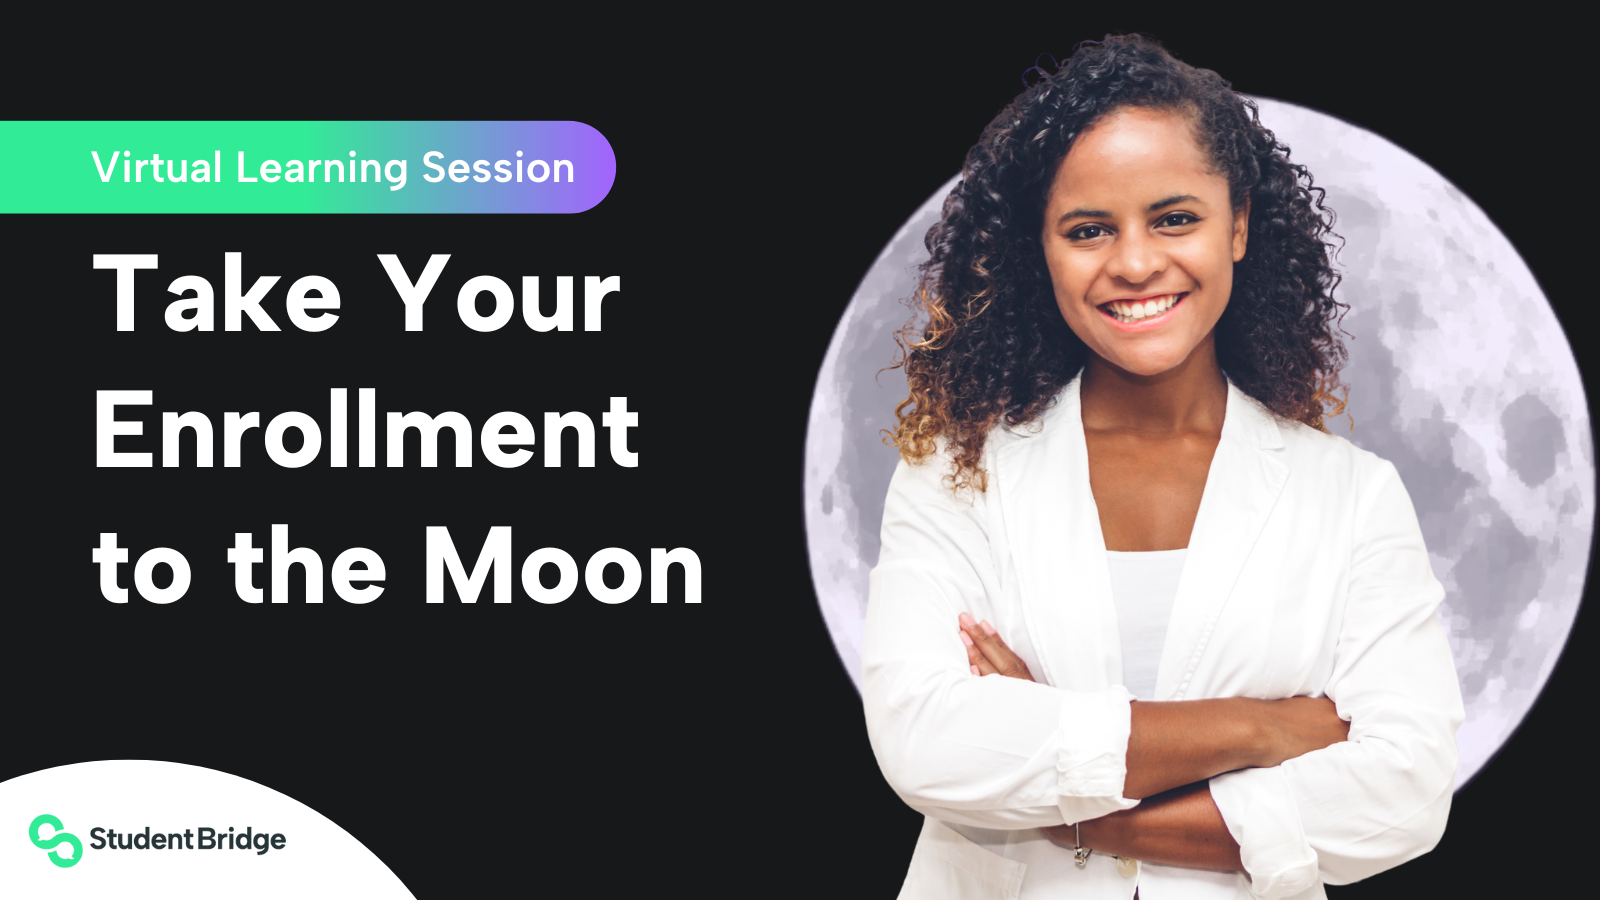 Webinar promo - Take Your Enrollment to the Moon